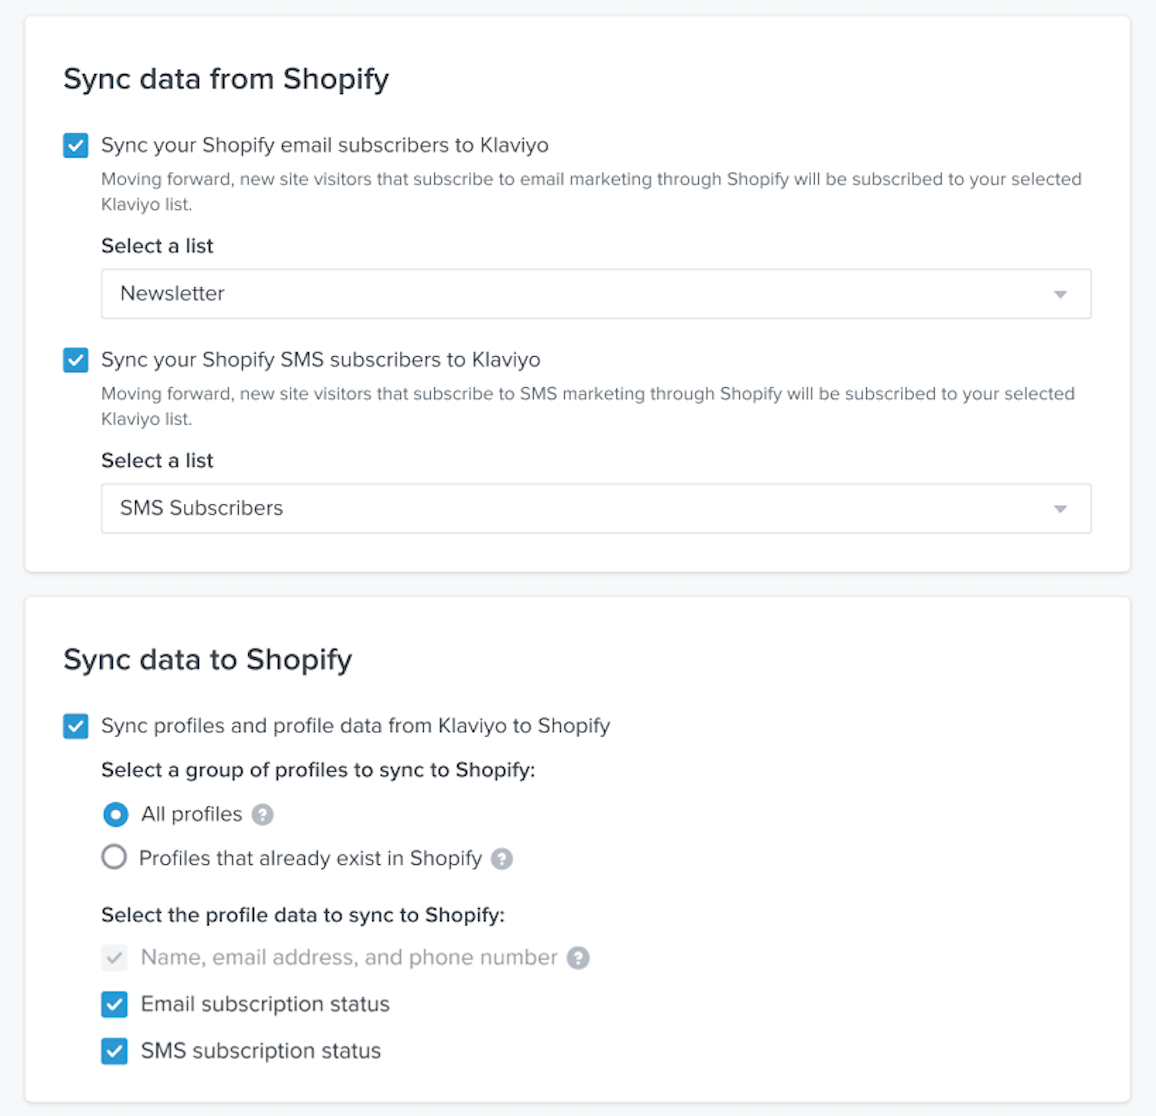 Shopify integration settings page in Klaviyo showing Sync data from Shopify and Sync data to Shopify sections